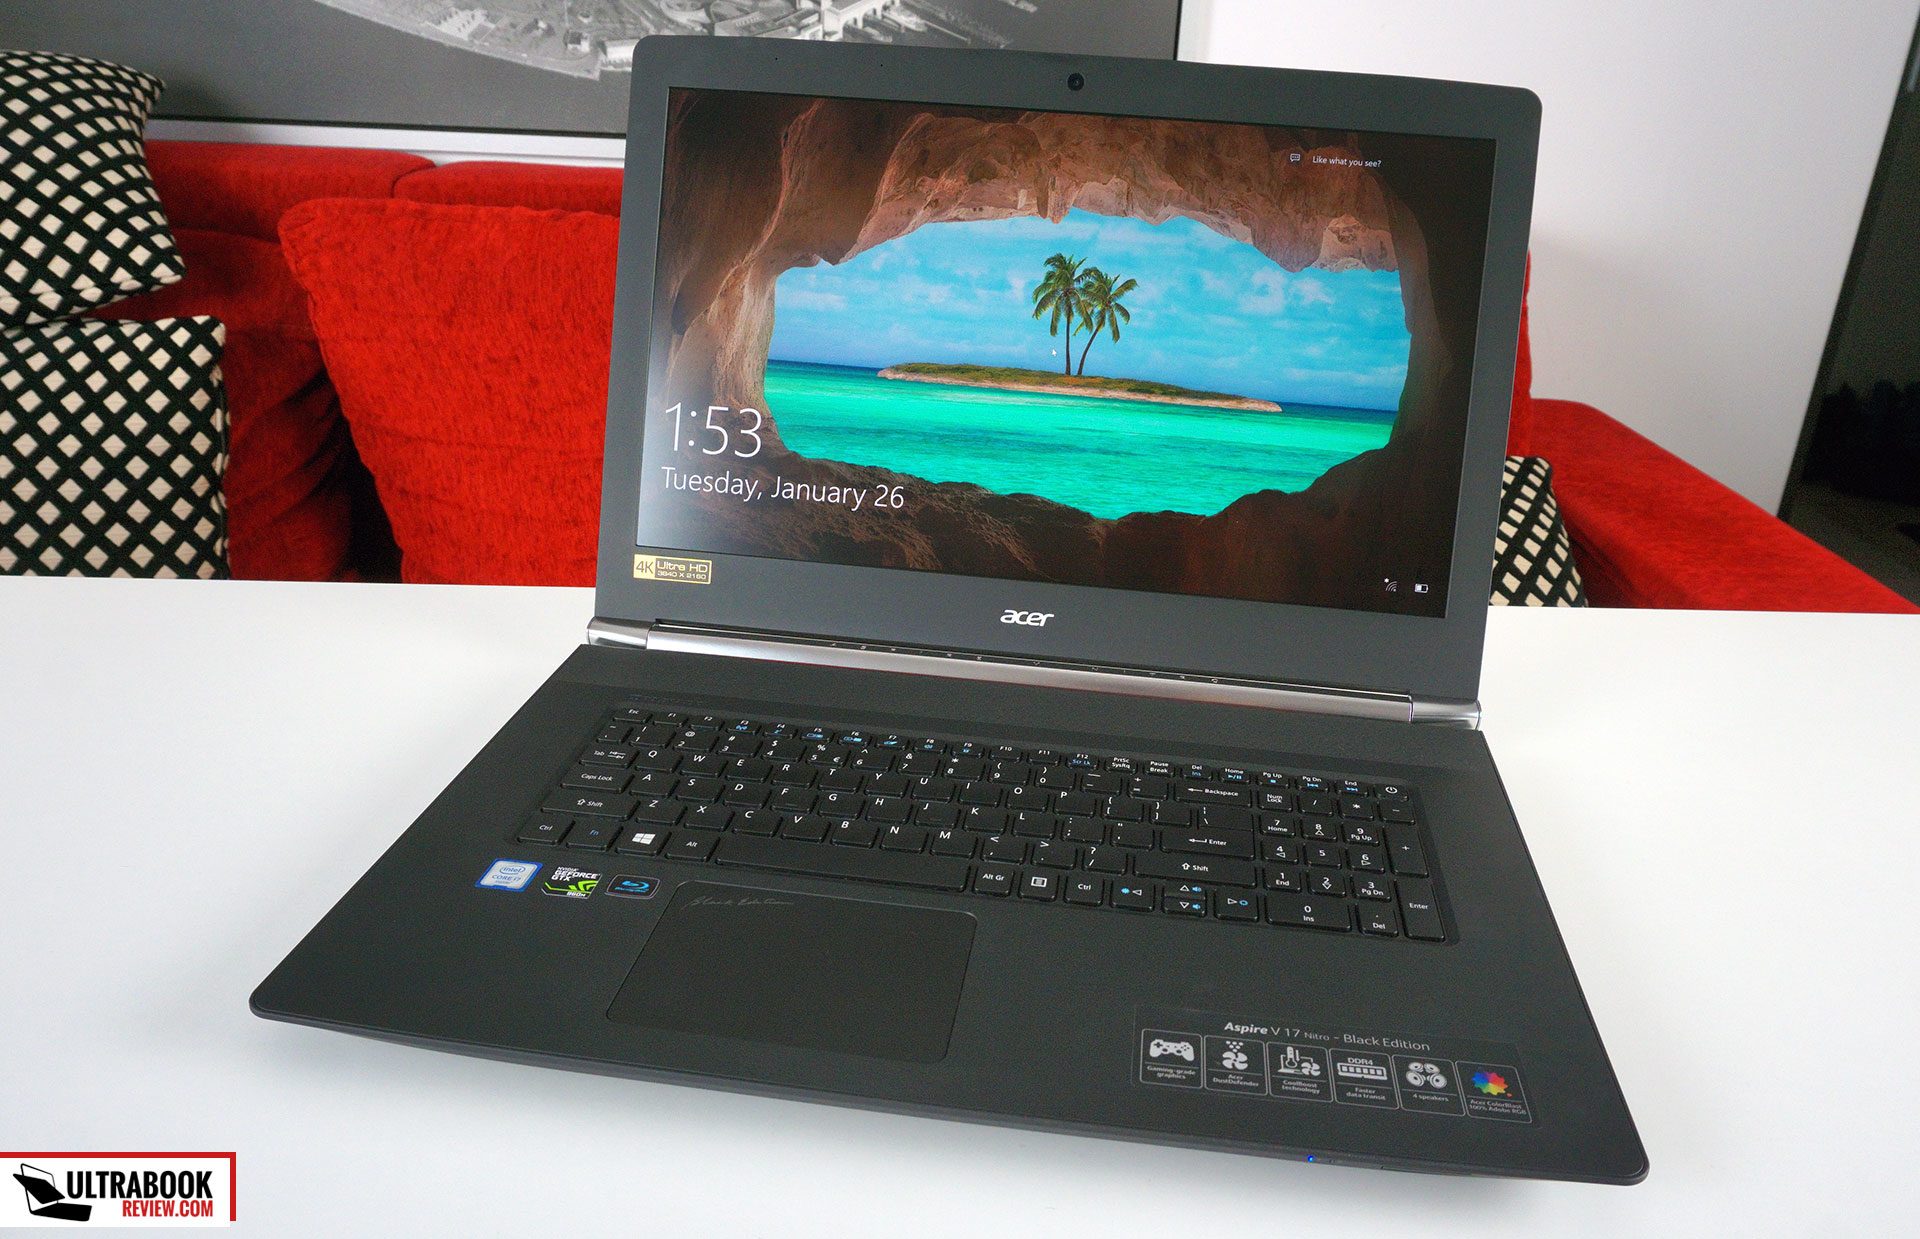 Acer Aspire V17 VN7-792G review - the 17-inch "Black Edition" laptop